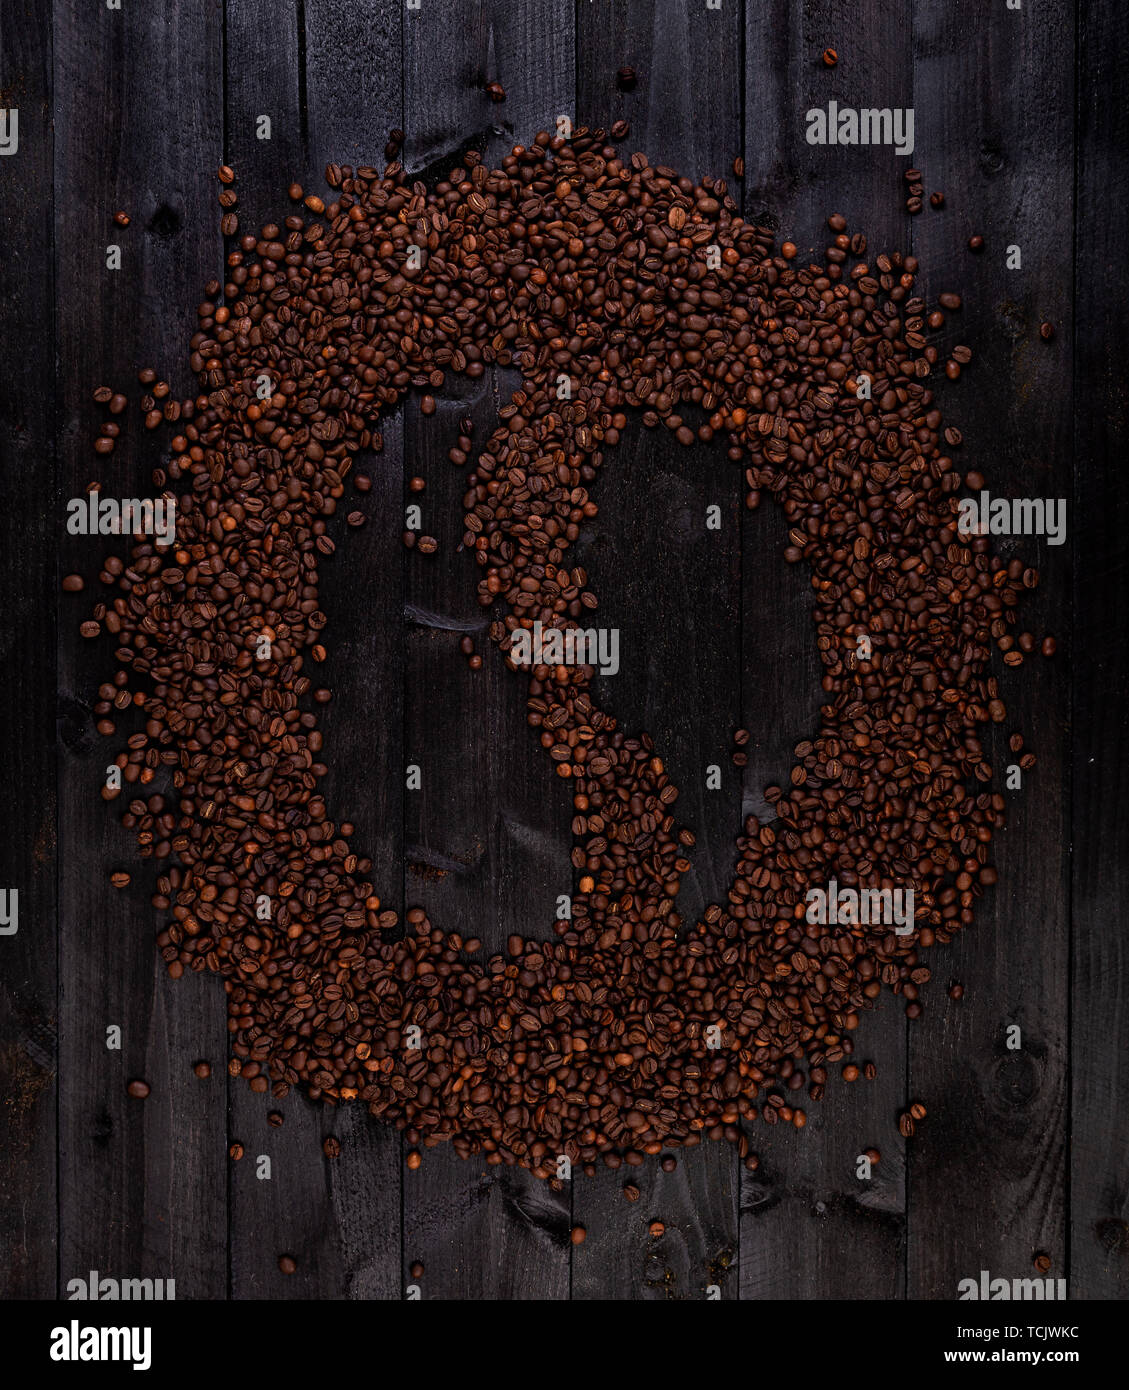 Coffee symbol made of roasted coffee beans on a black wooden background Stock Photo